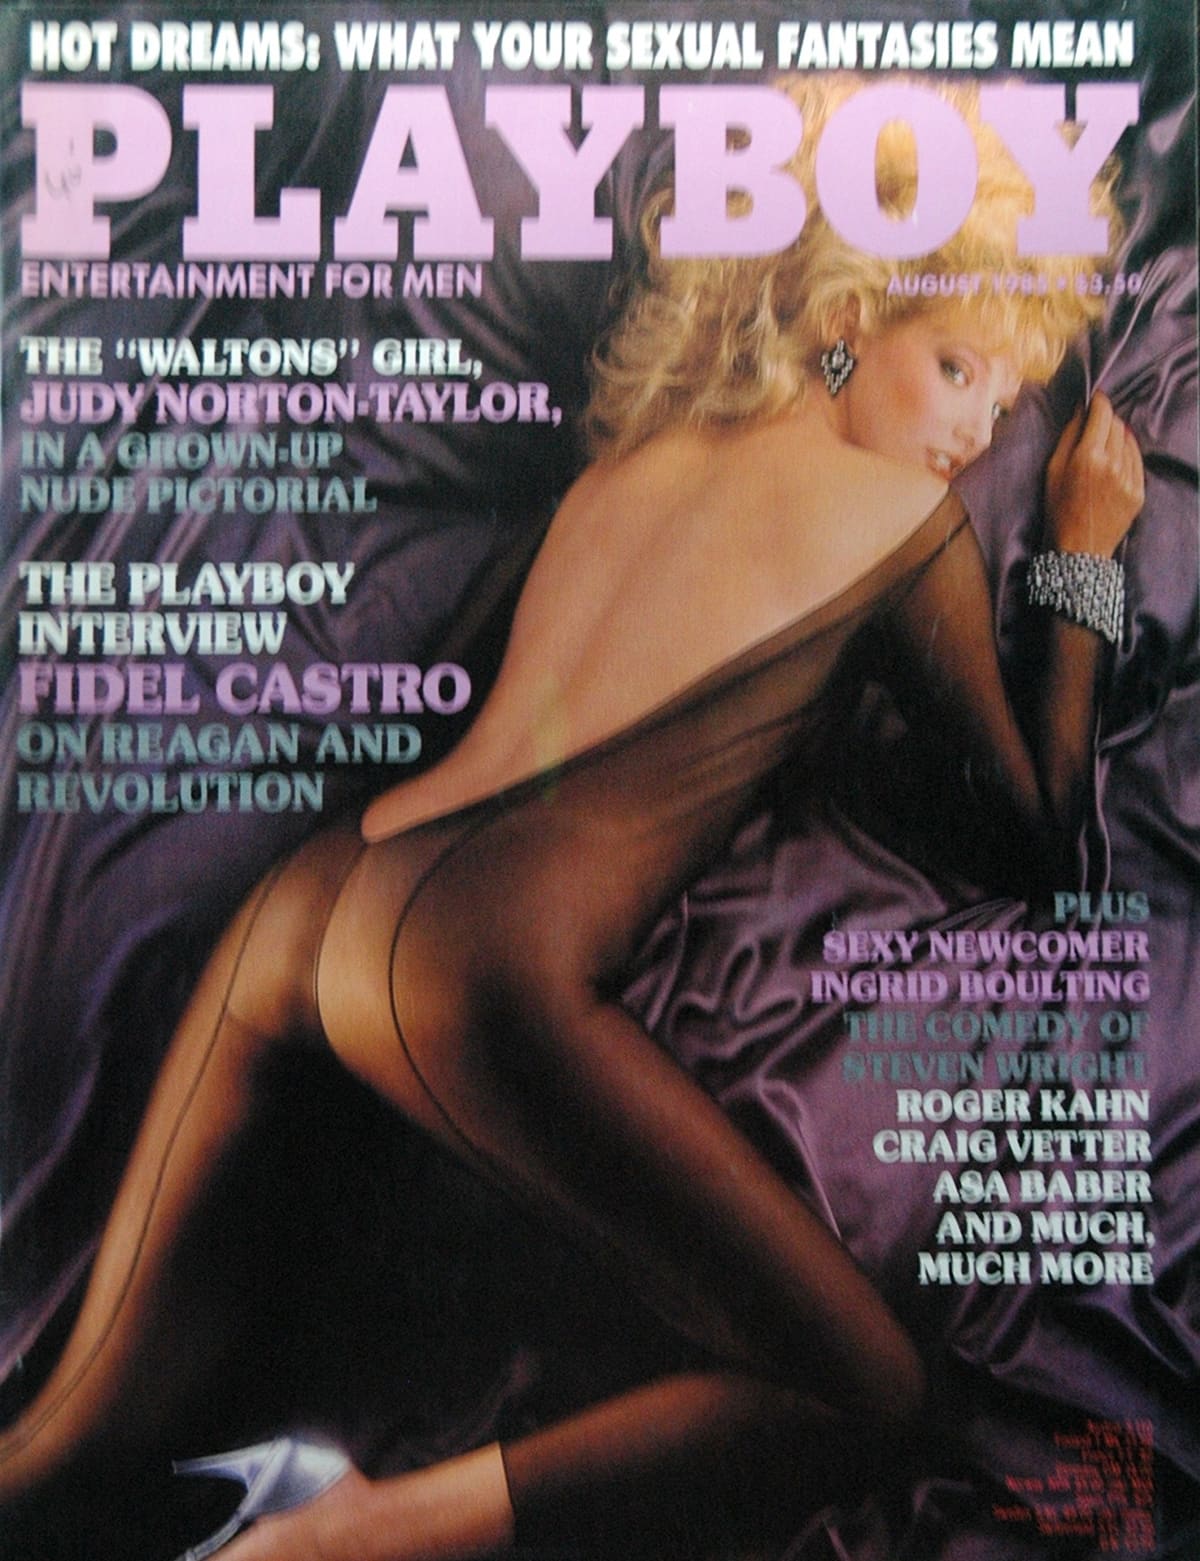 The Waltons star Judy Norton posed nude in Playboy magazine in 1985